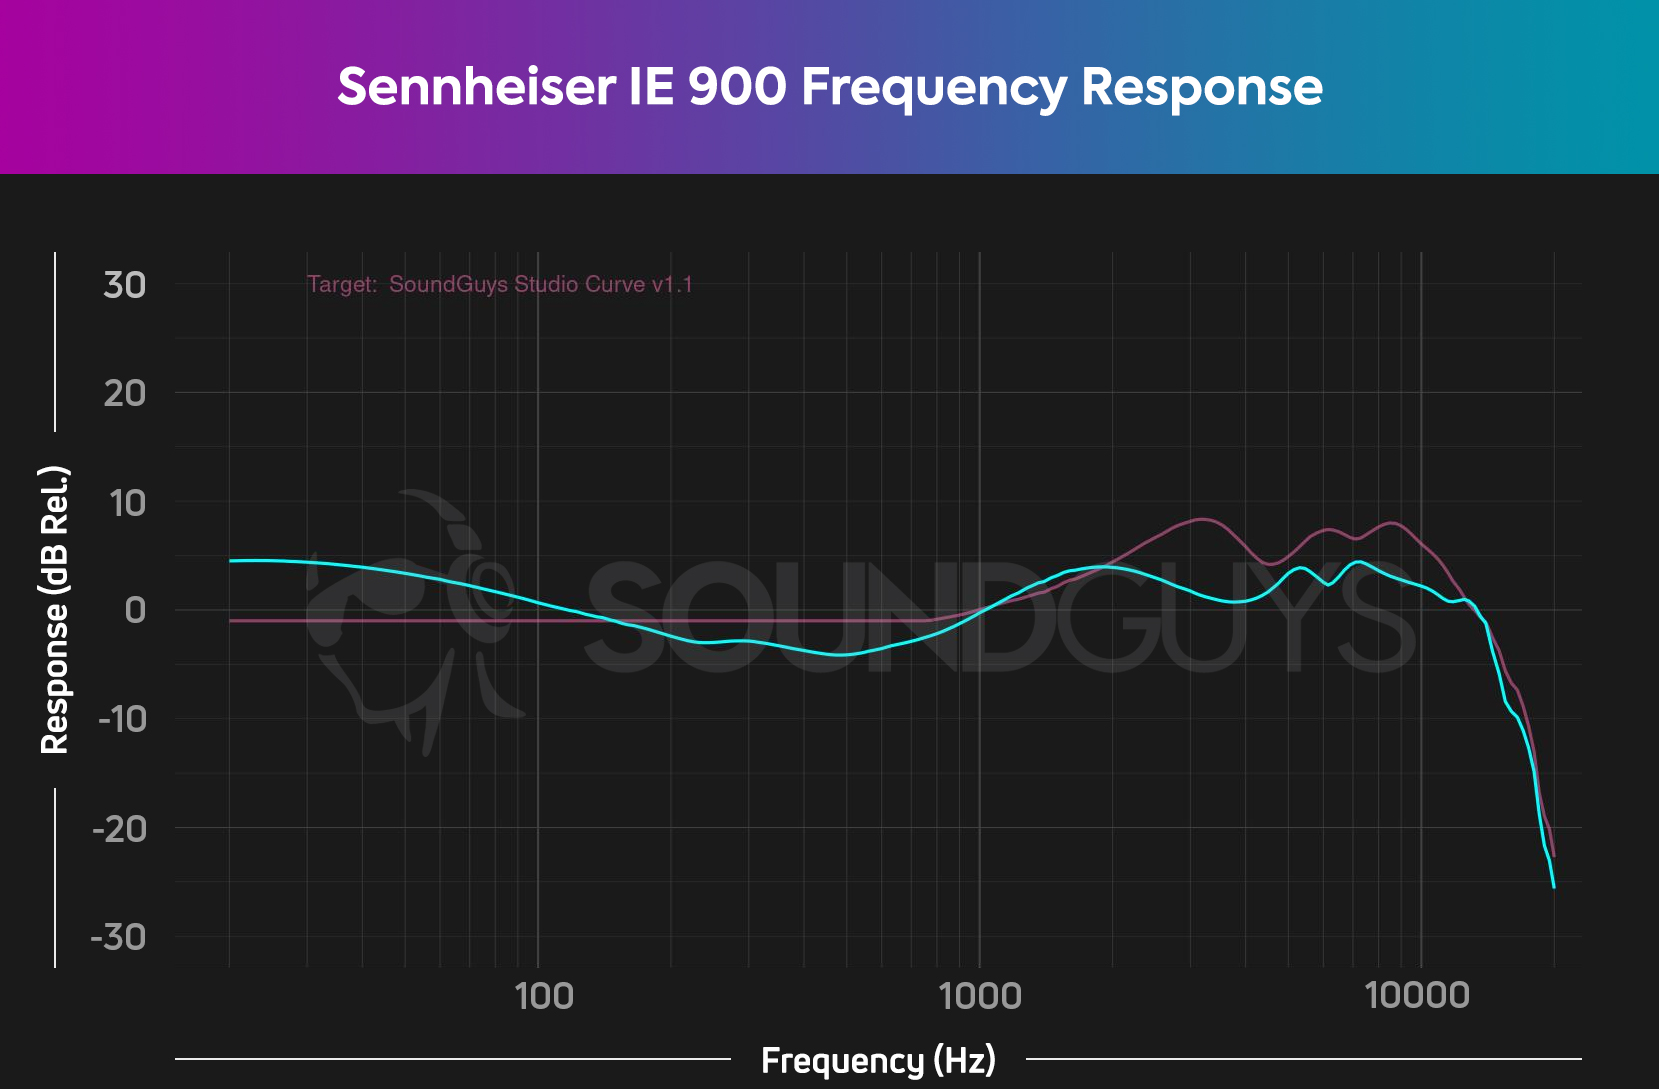 The image shows the Sennheiser IE 900 frequency response as measured against our ideal studio frequency response.